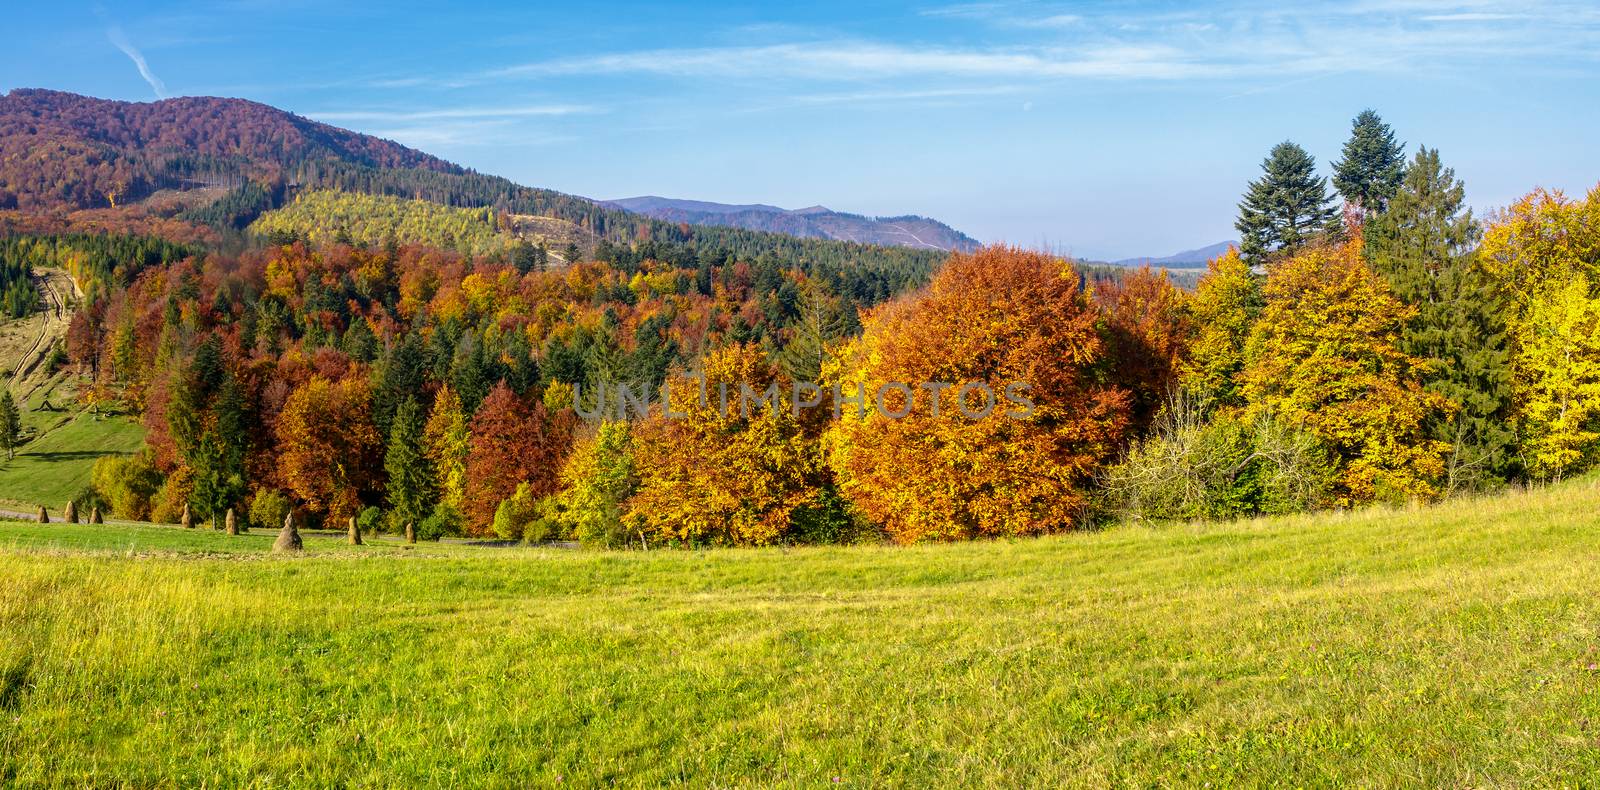 trees on autumn meadow in mountains by Pellinni